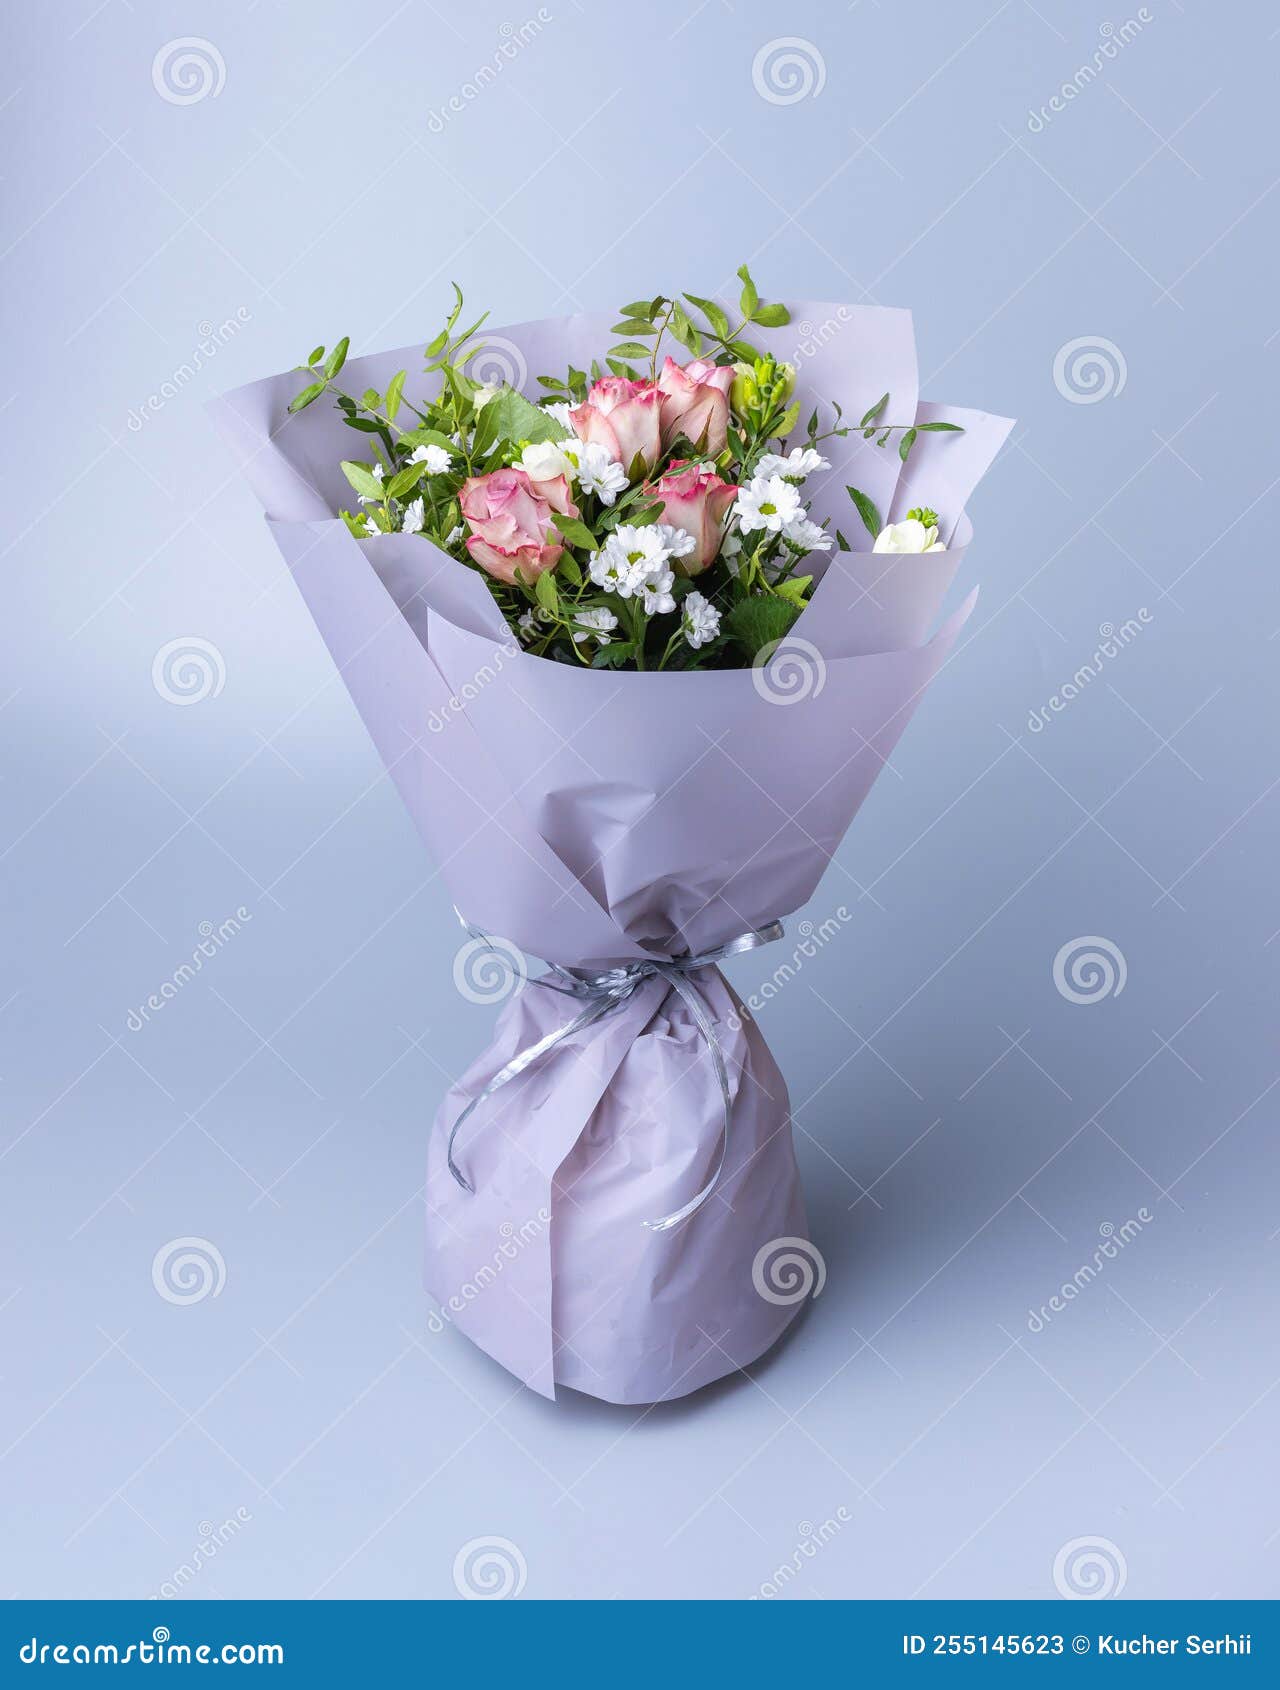 Delicate Bouquet of Roses Wrapped in Bright Floral Paper Stands on a Blue  Background. Stock Image - Image of plant, banner: 255145623